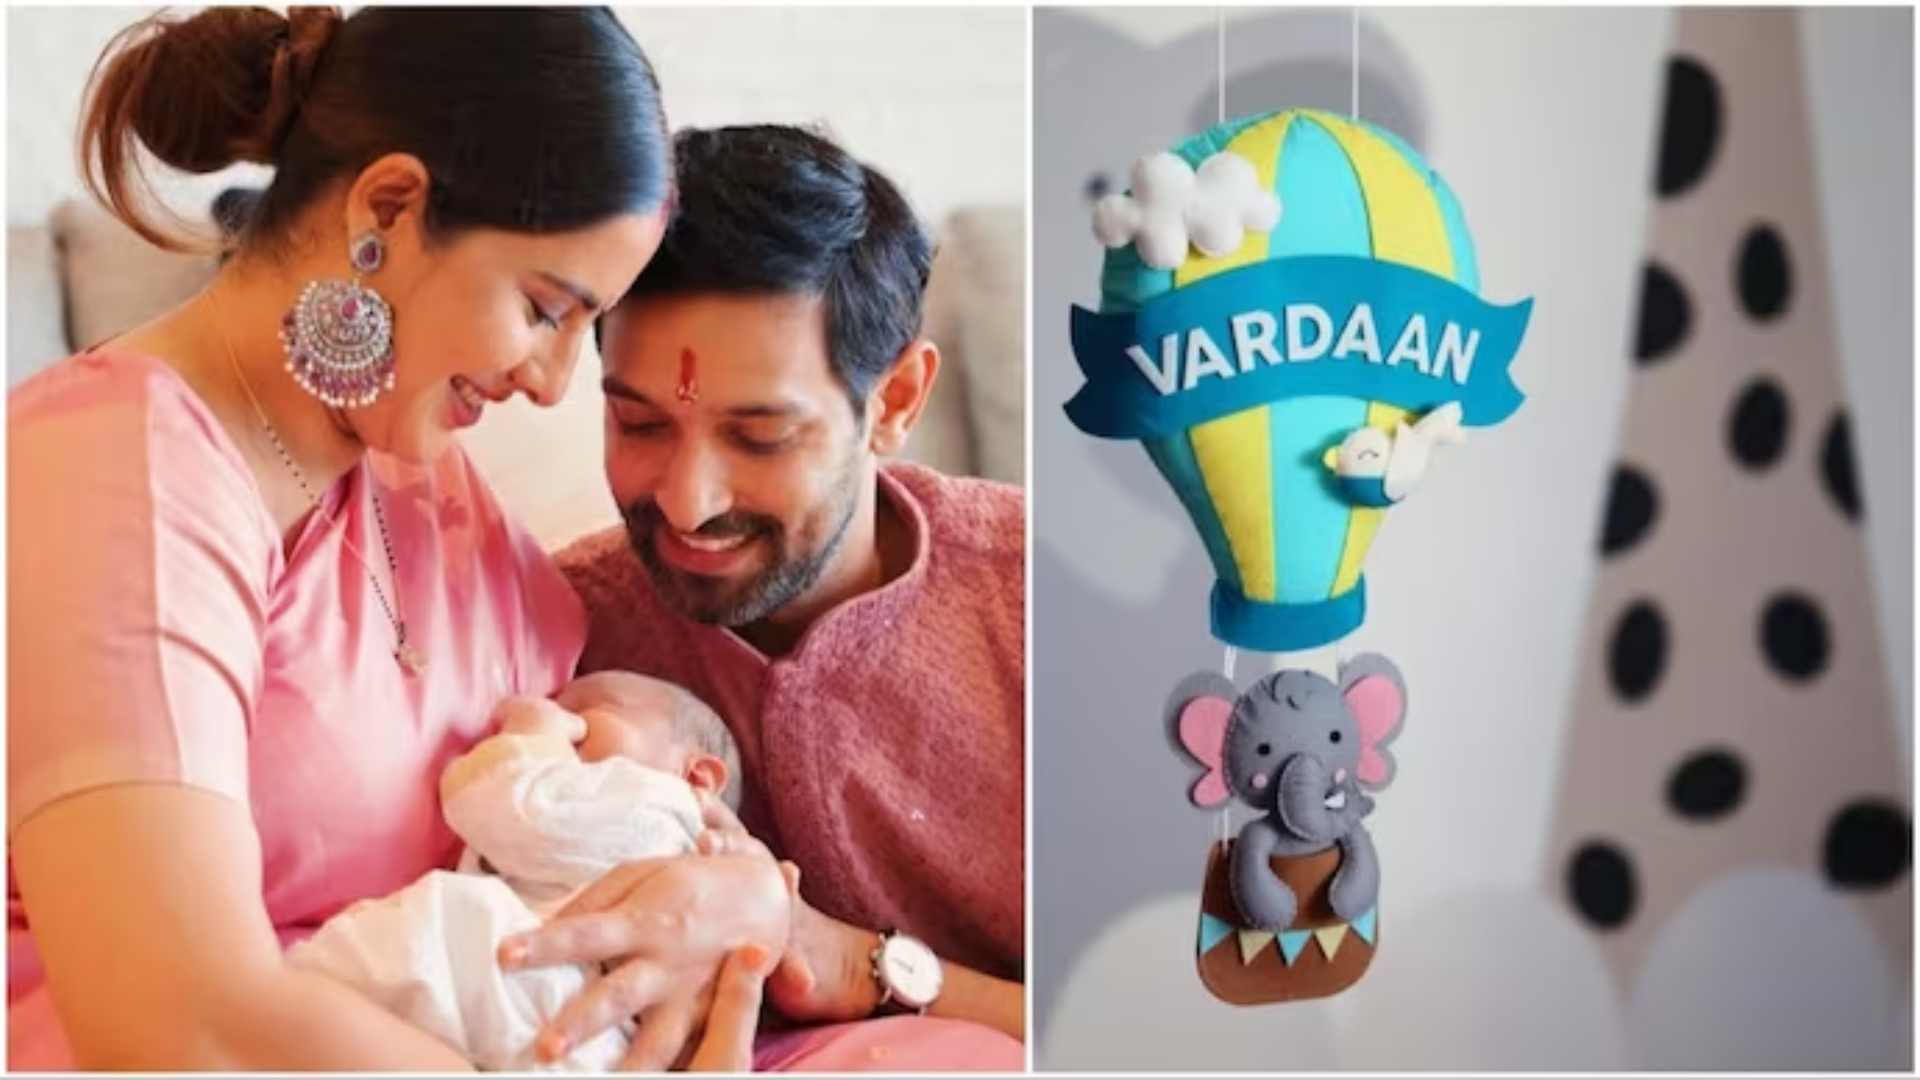 IT’S A BOY! Vikrant Massey and Sheetal Thakur Welcome Baby Vardaan